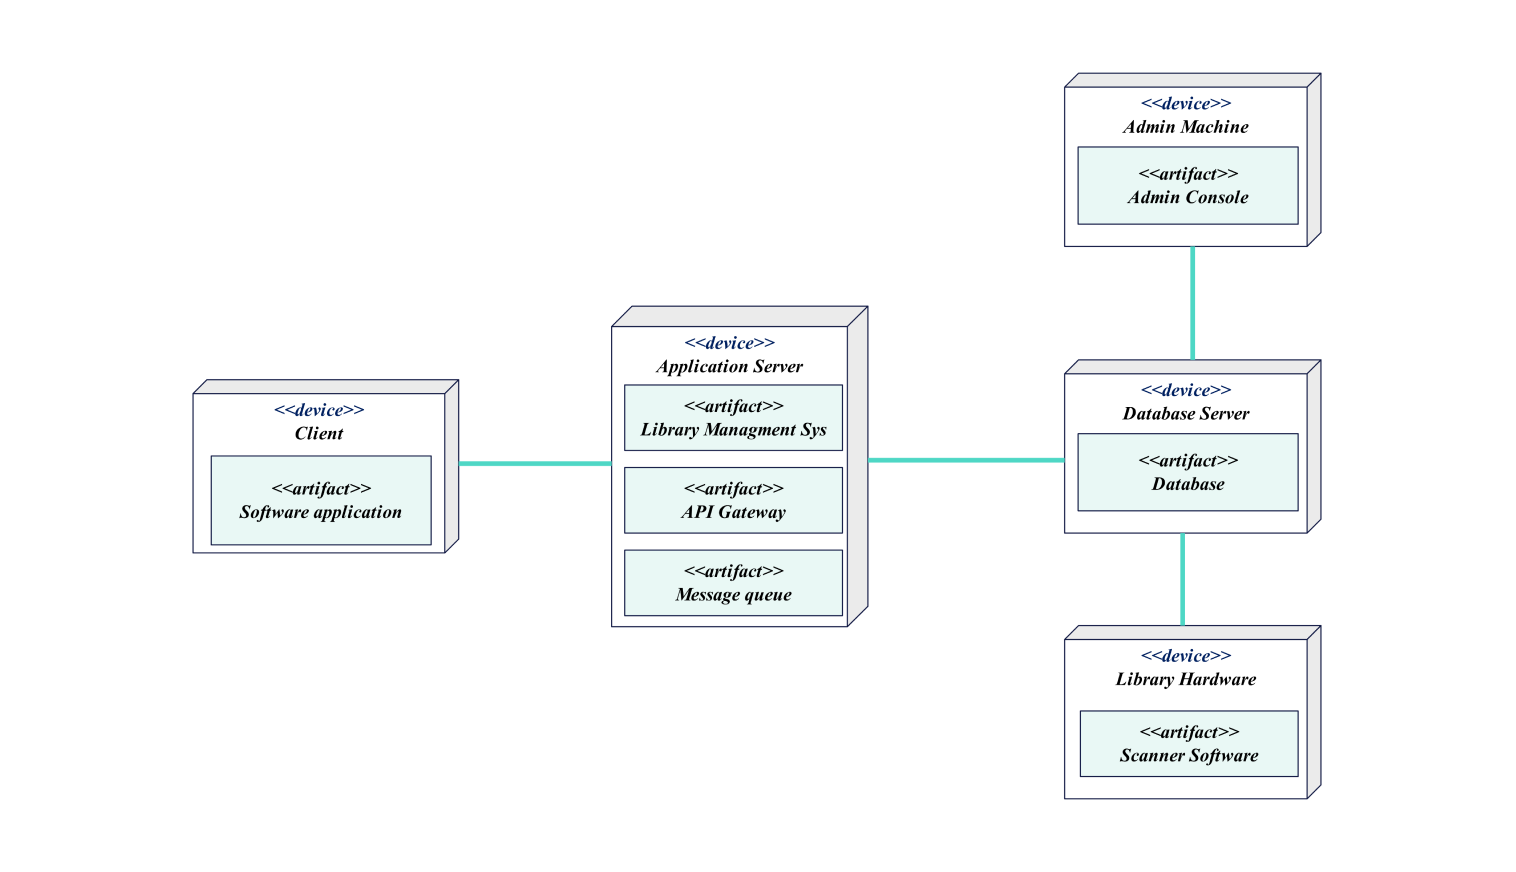 Deployment Diagram for library management